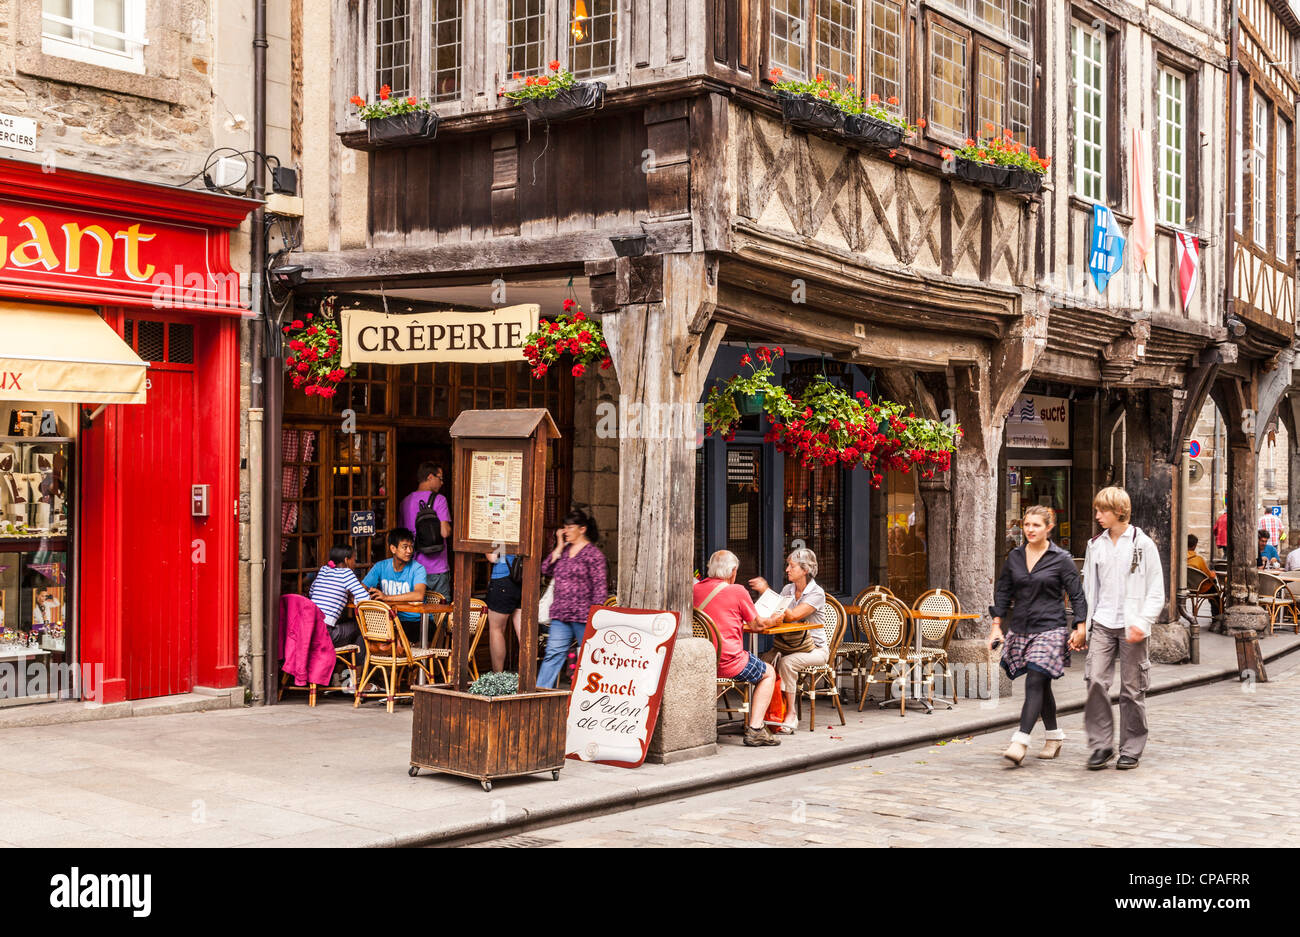 People sitting and eating in a creperie in Place des Merciers, Dinan, Brittany, France. Stock Photo